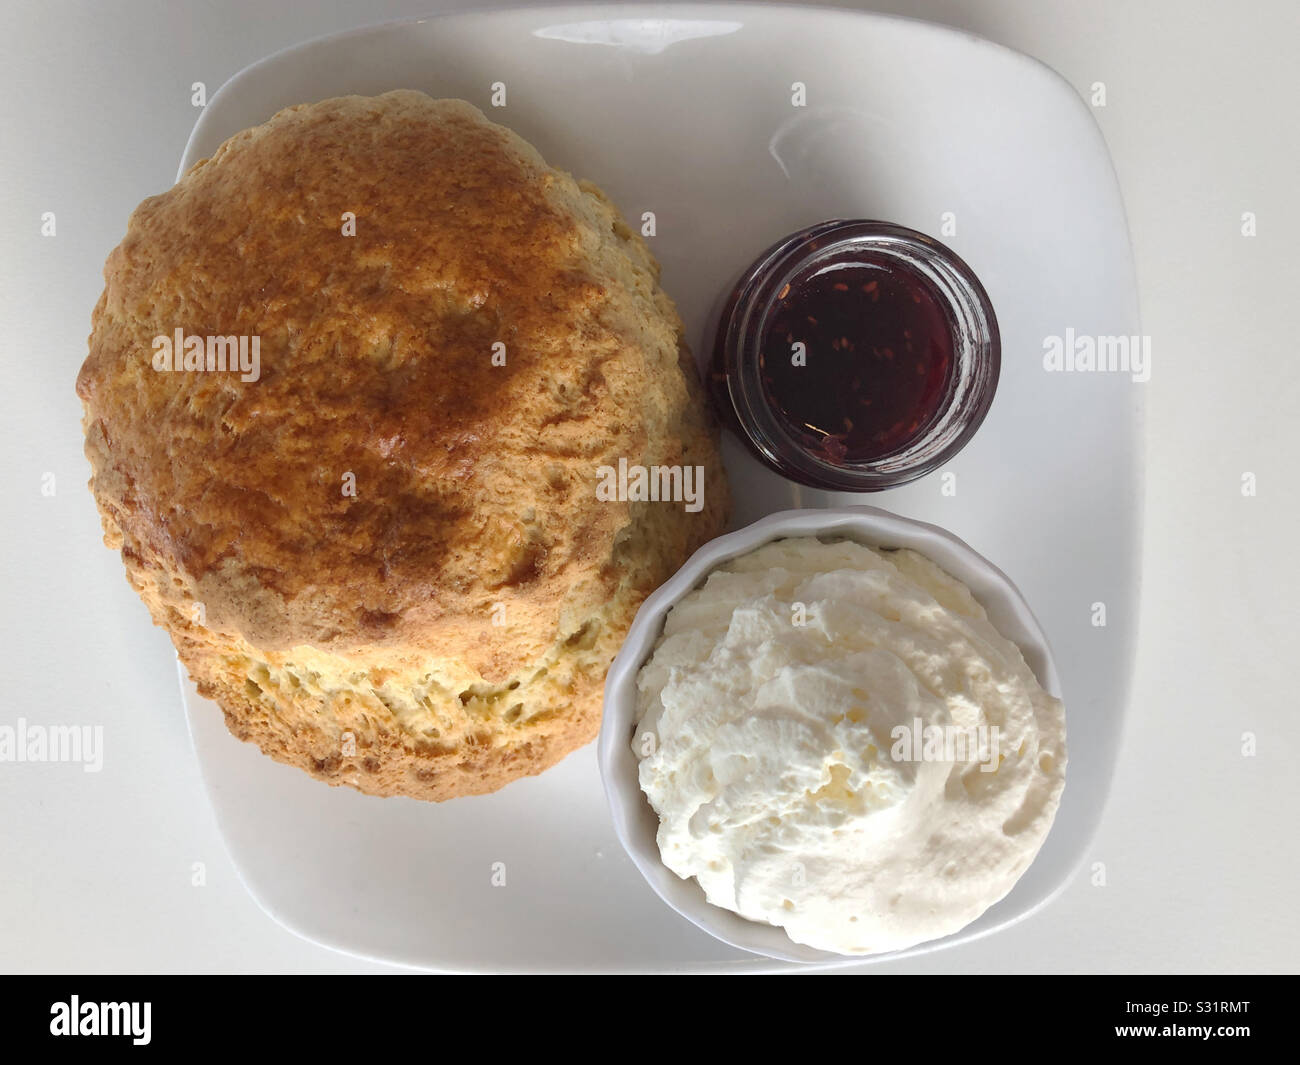 A scone, cream and jam on a square plate. Stock Photo